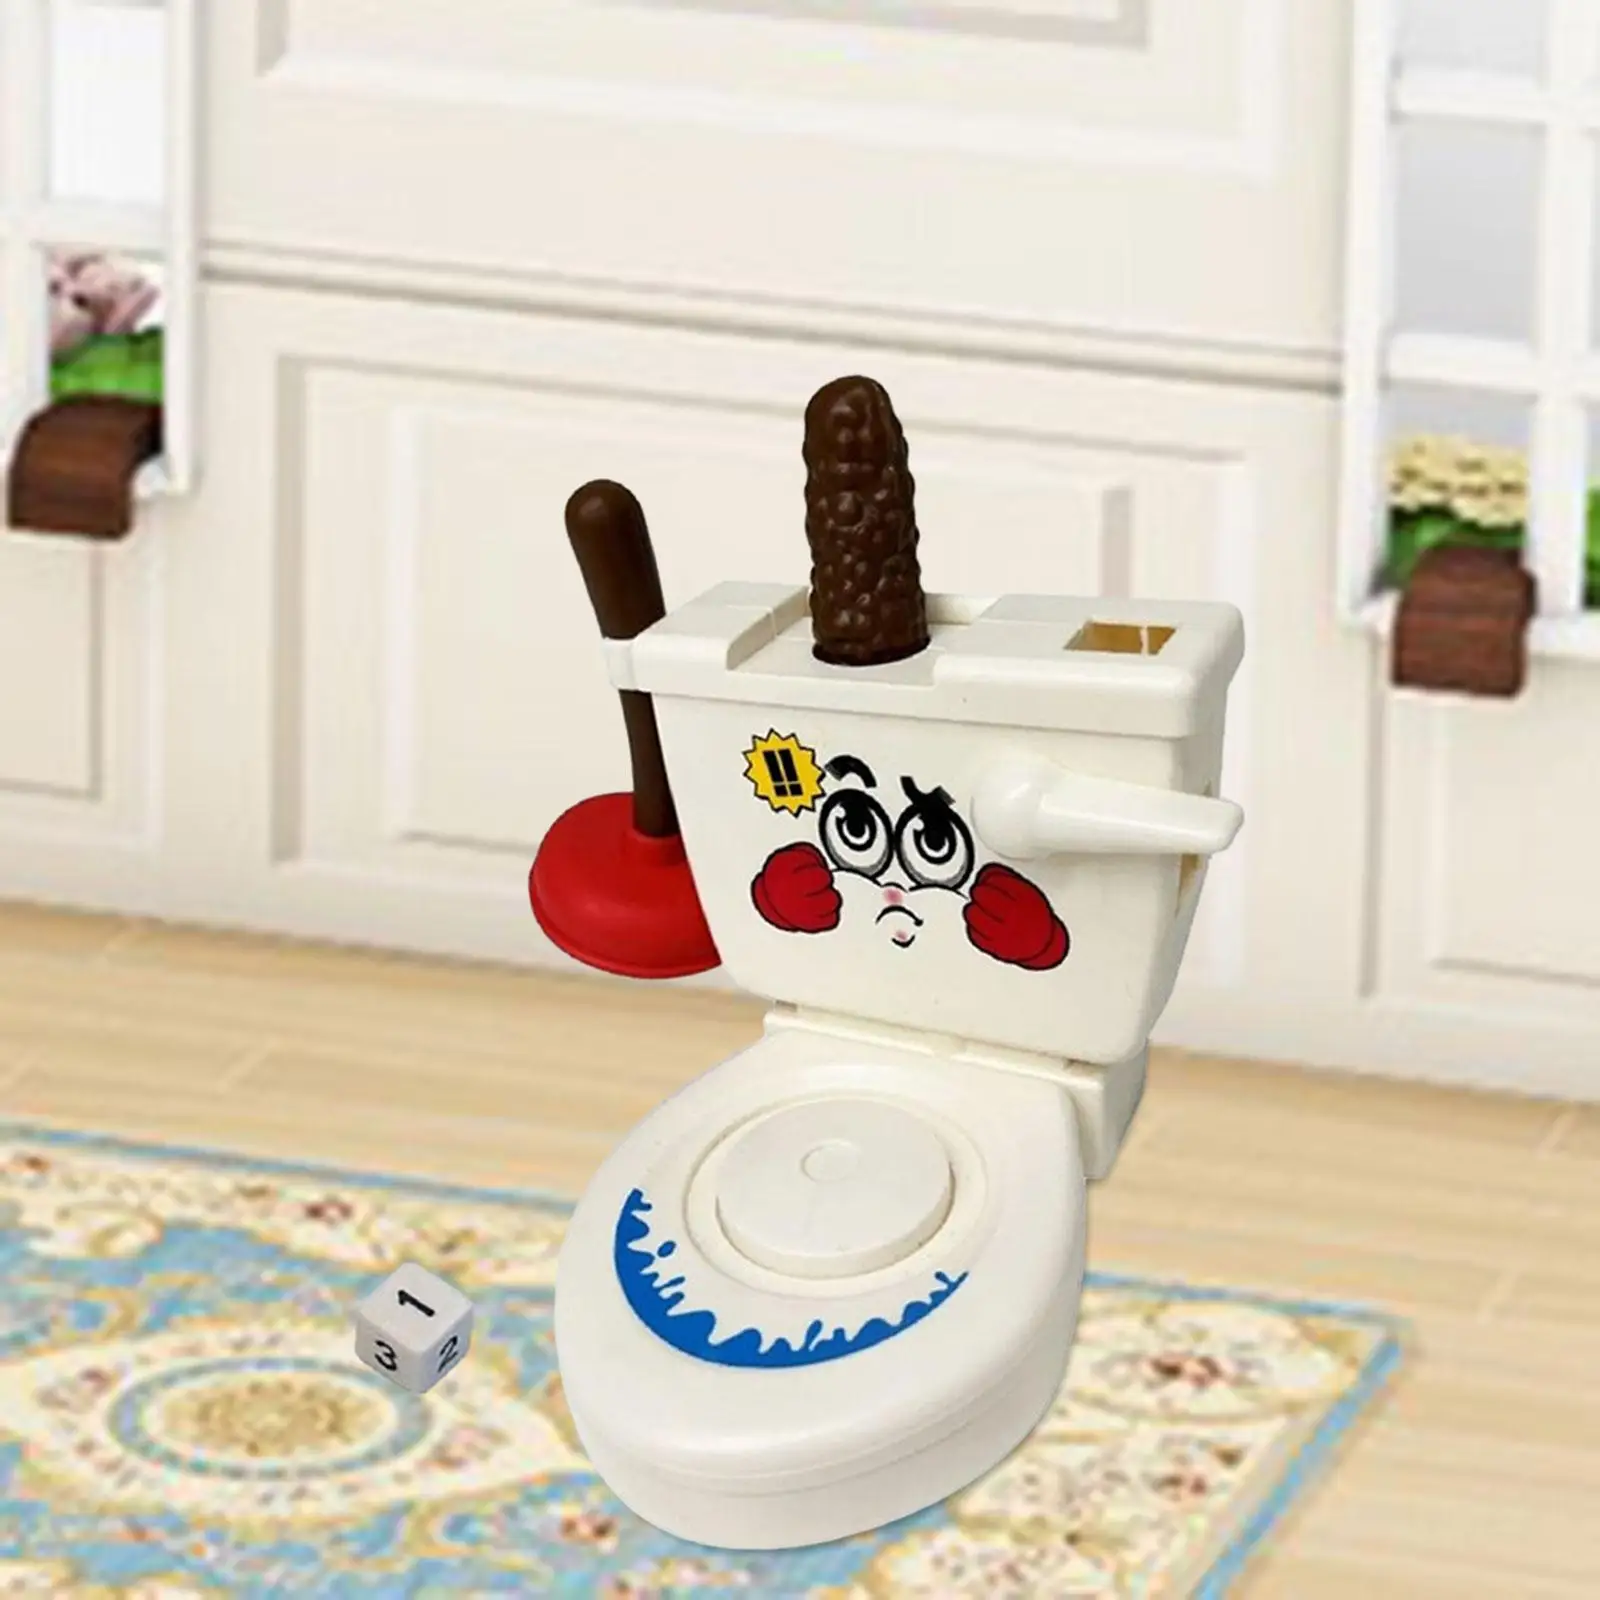 Stool Toilet Toy Simulated Toilet Ejection Poop Toilet Simulation Toilet Ejection Toy for Girls and Boys Kid Children Xmas Gifts